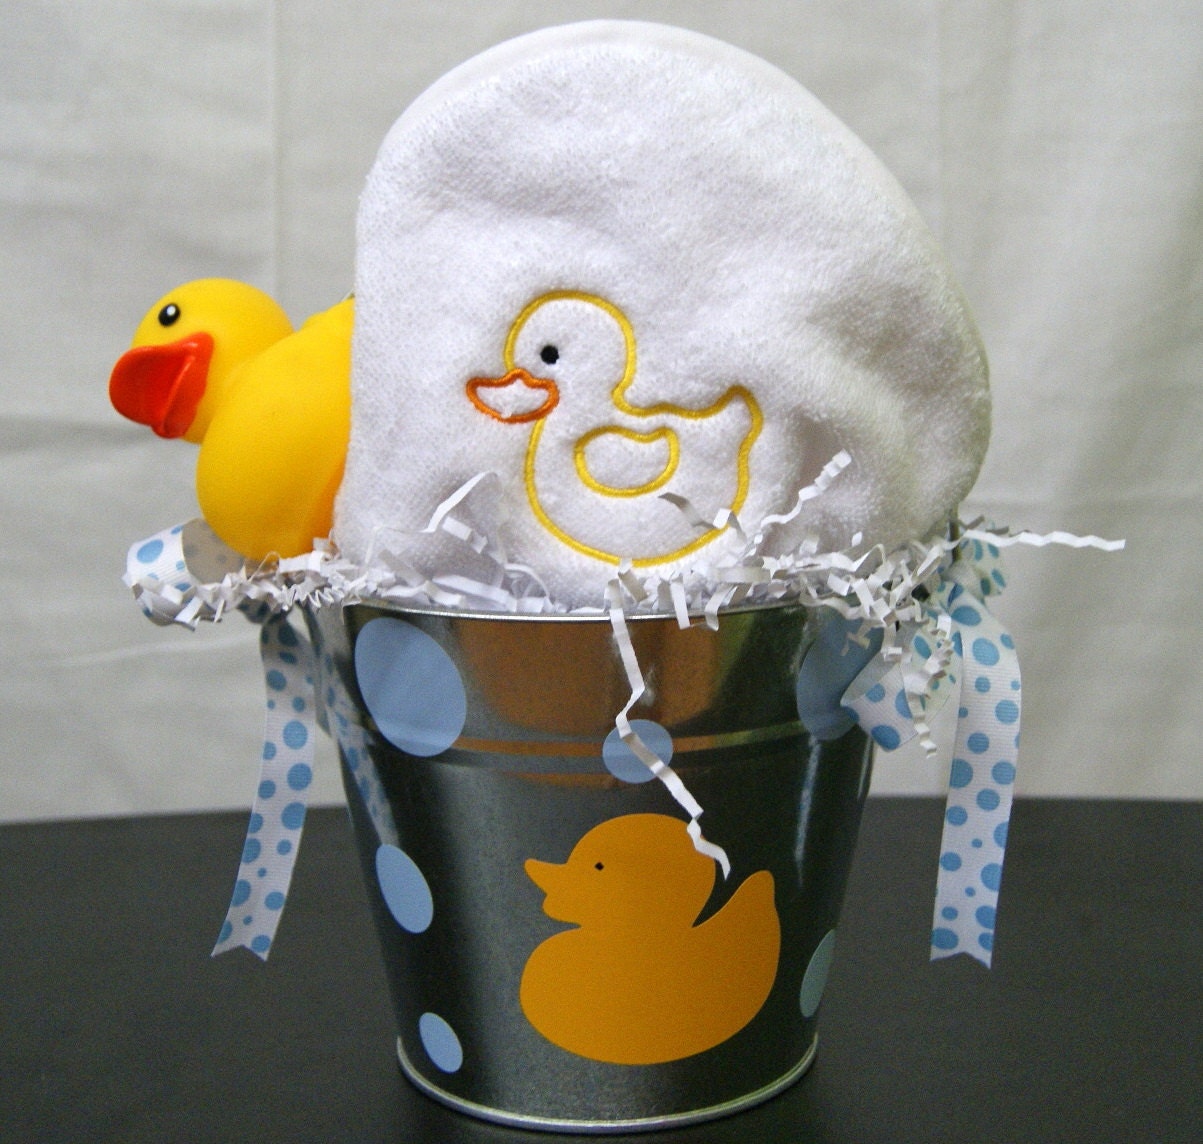 Personalized Hooded Towel with rubber ducky gift set